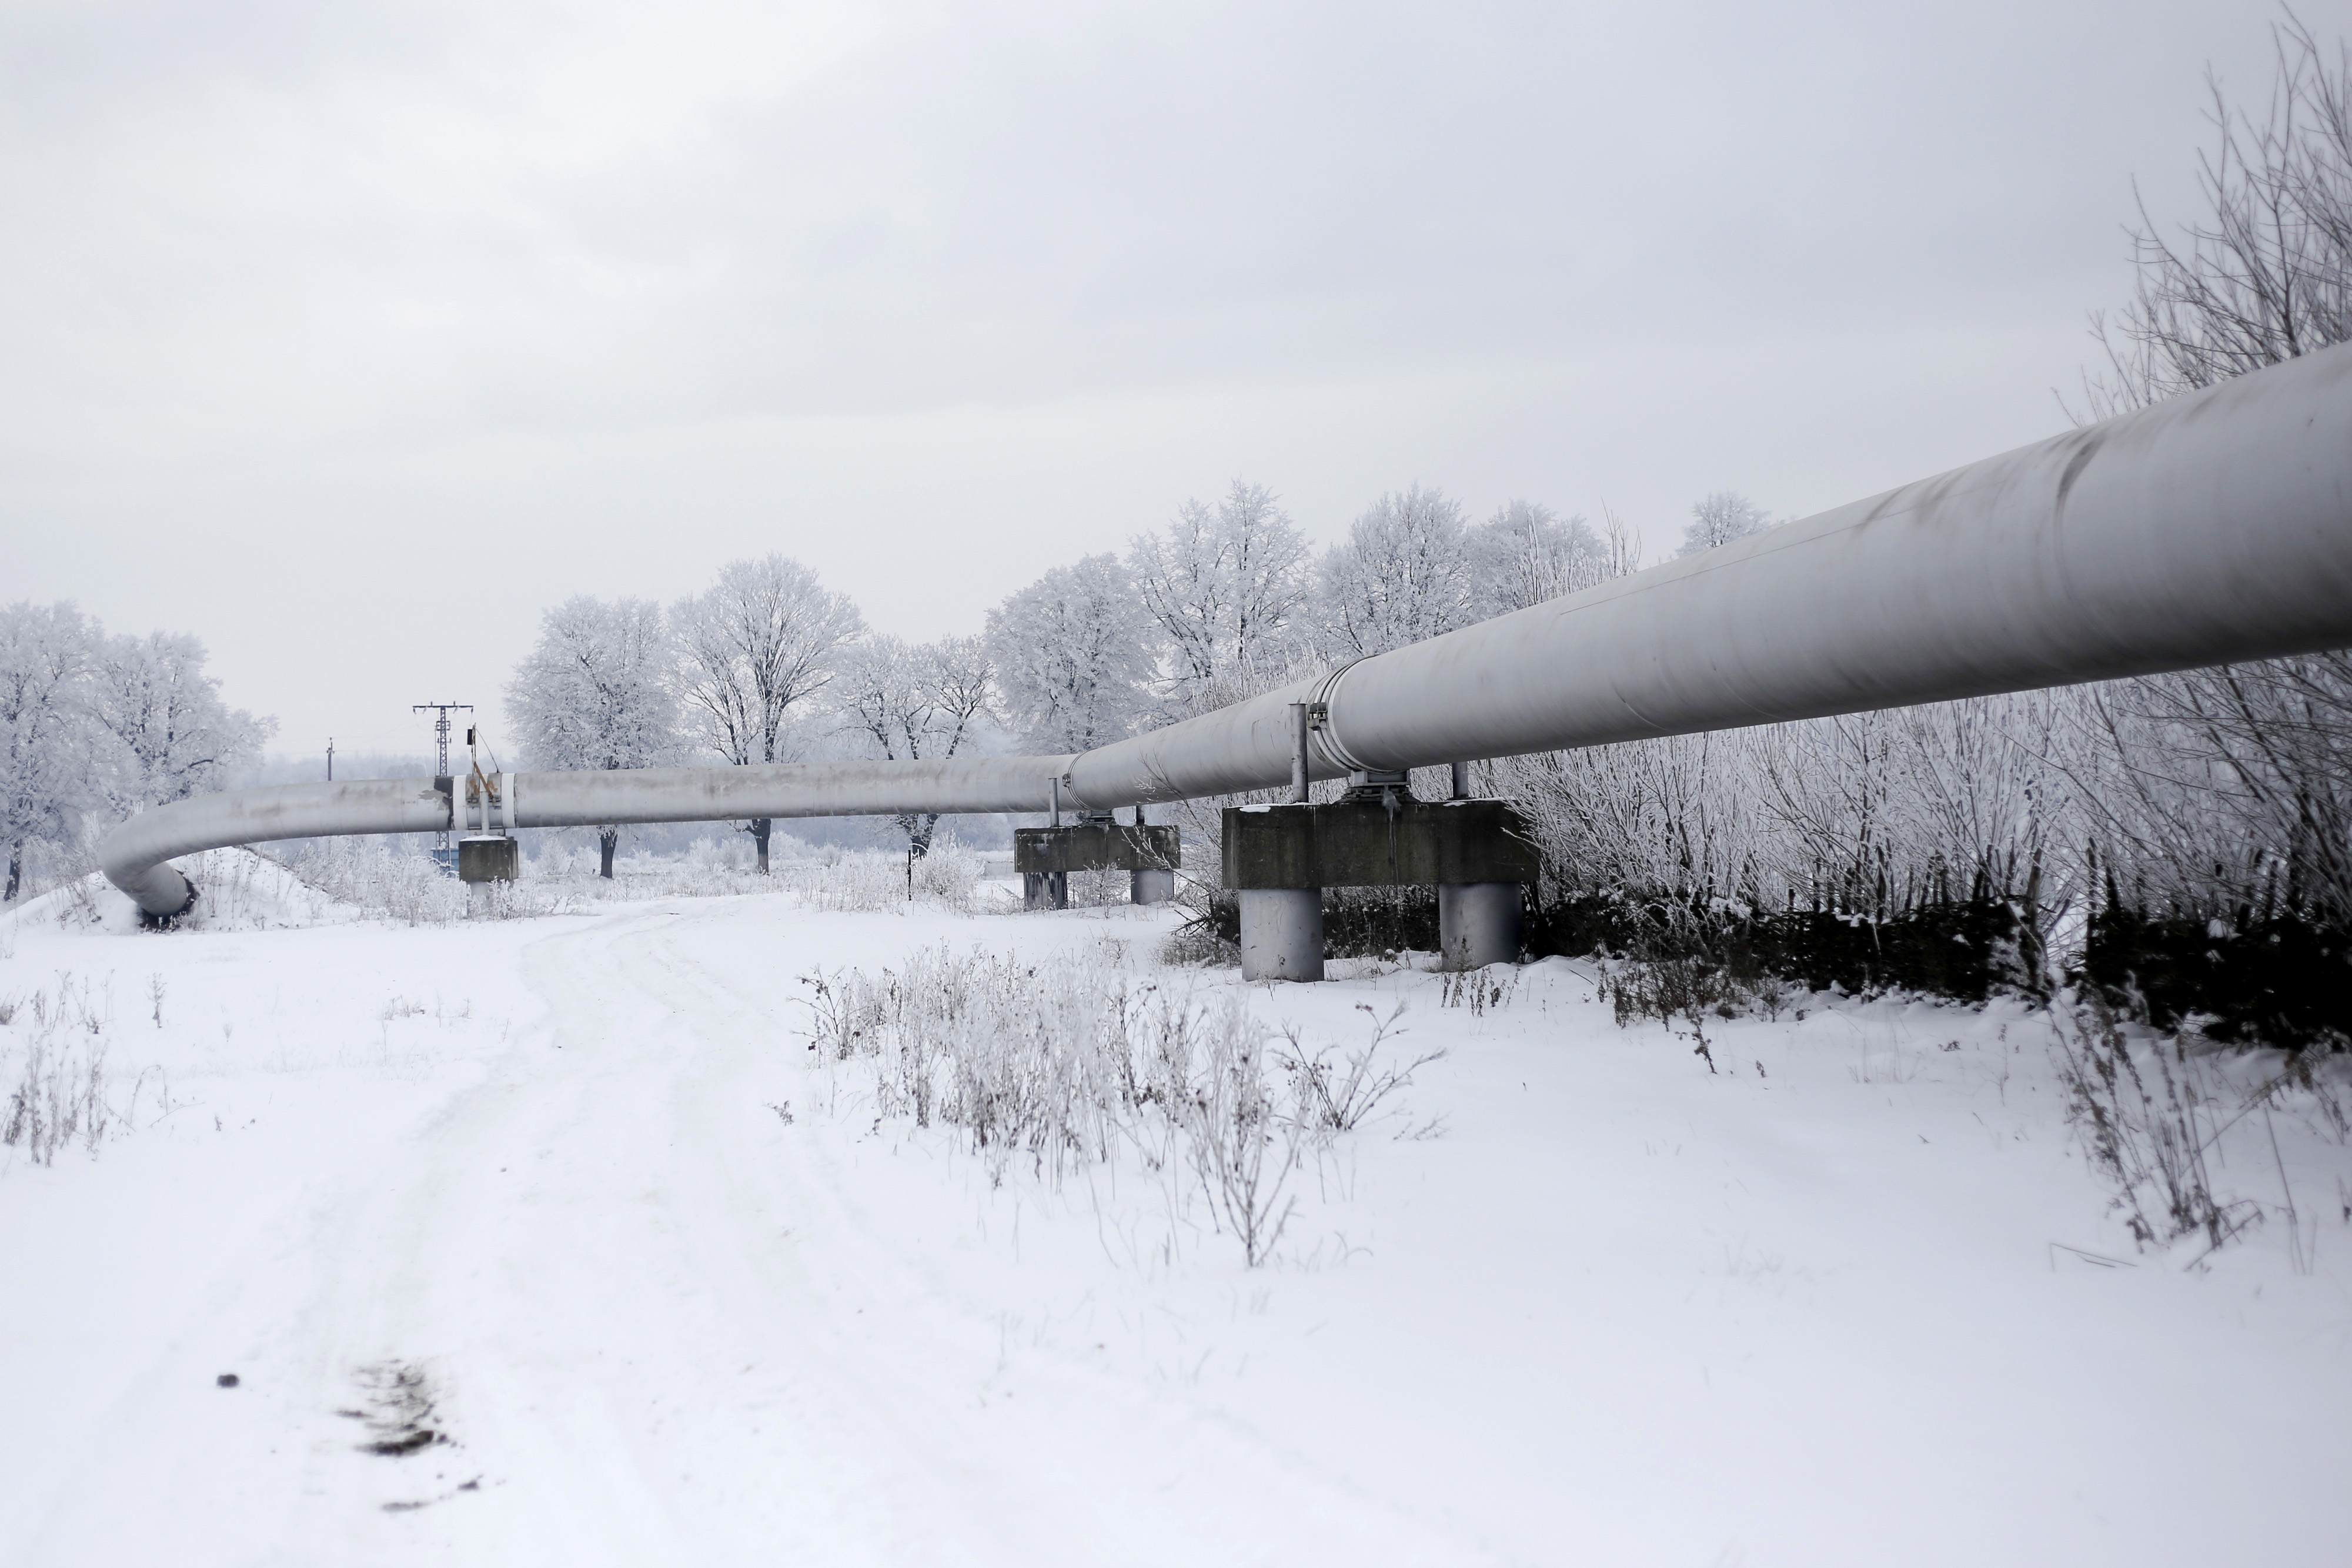 A section of the Trans-Siberian Pipeline - Russia's main natural gas export pipeline, on Thursday, Feb. 6, 2014. (Vincent Mundy—Bloomberg via Getty Images)